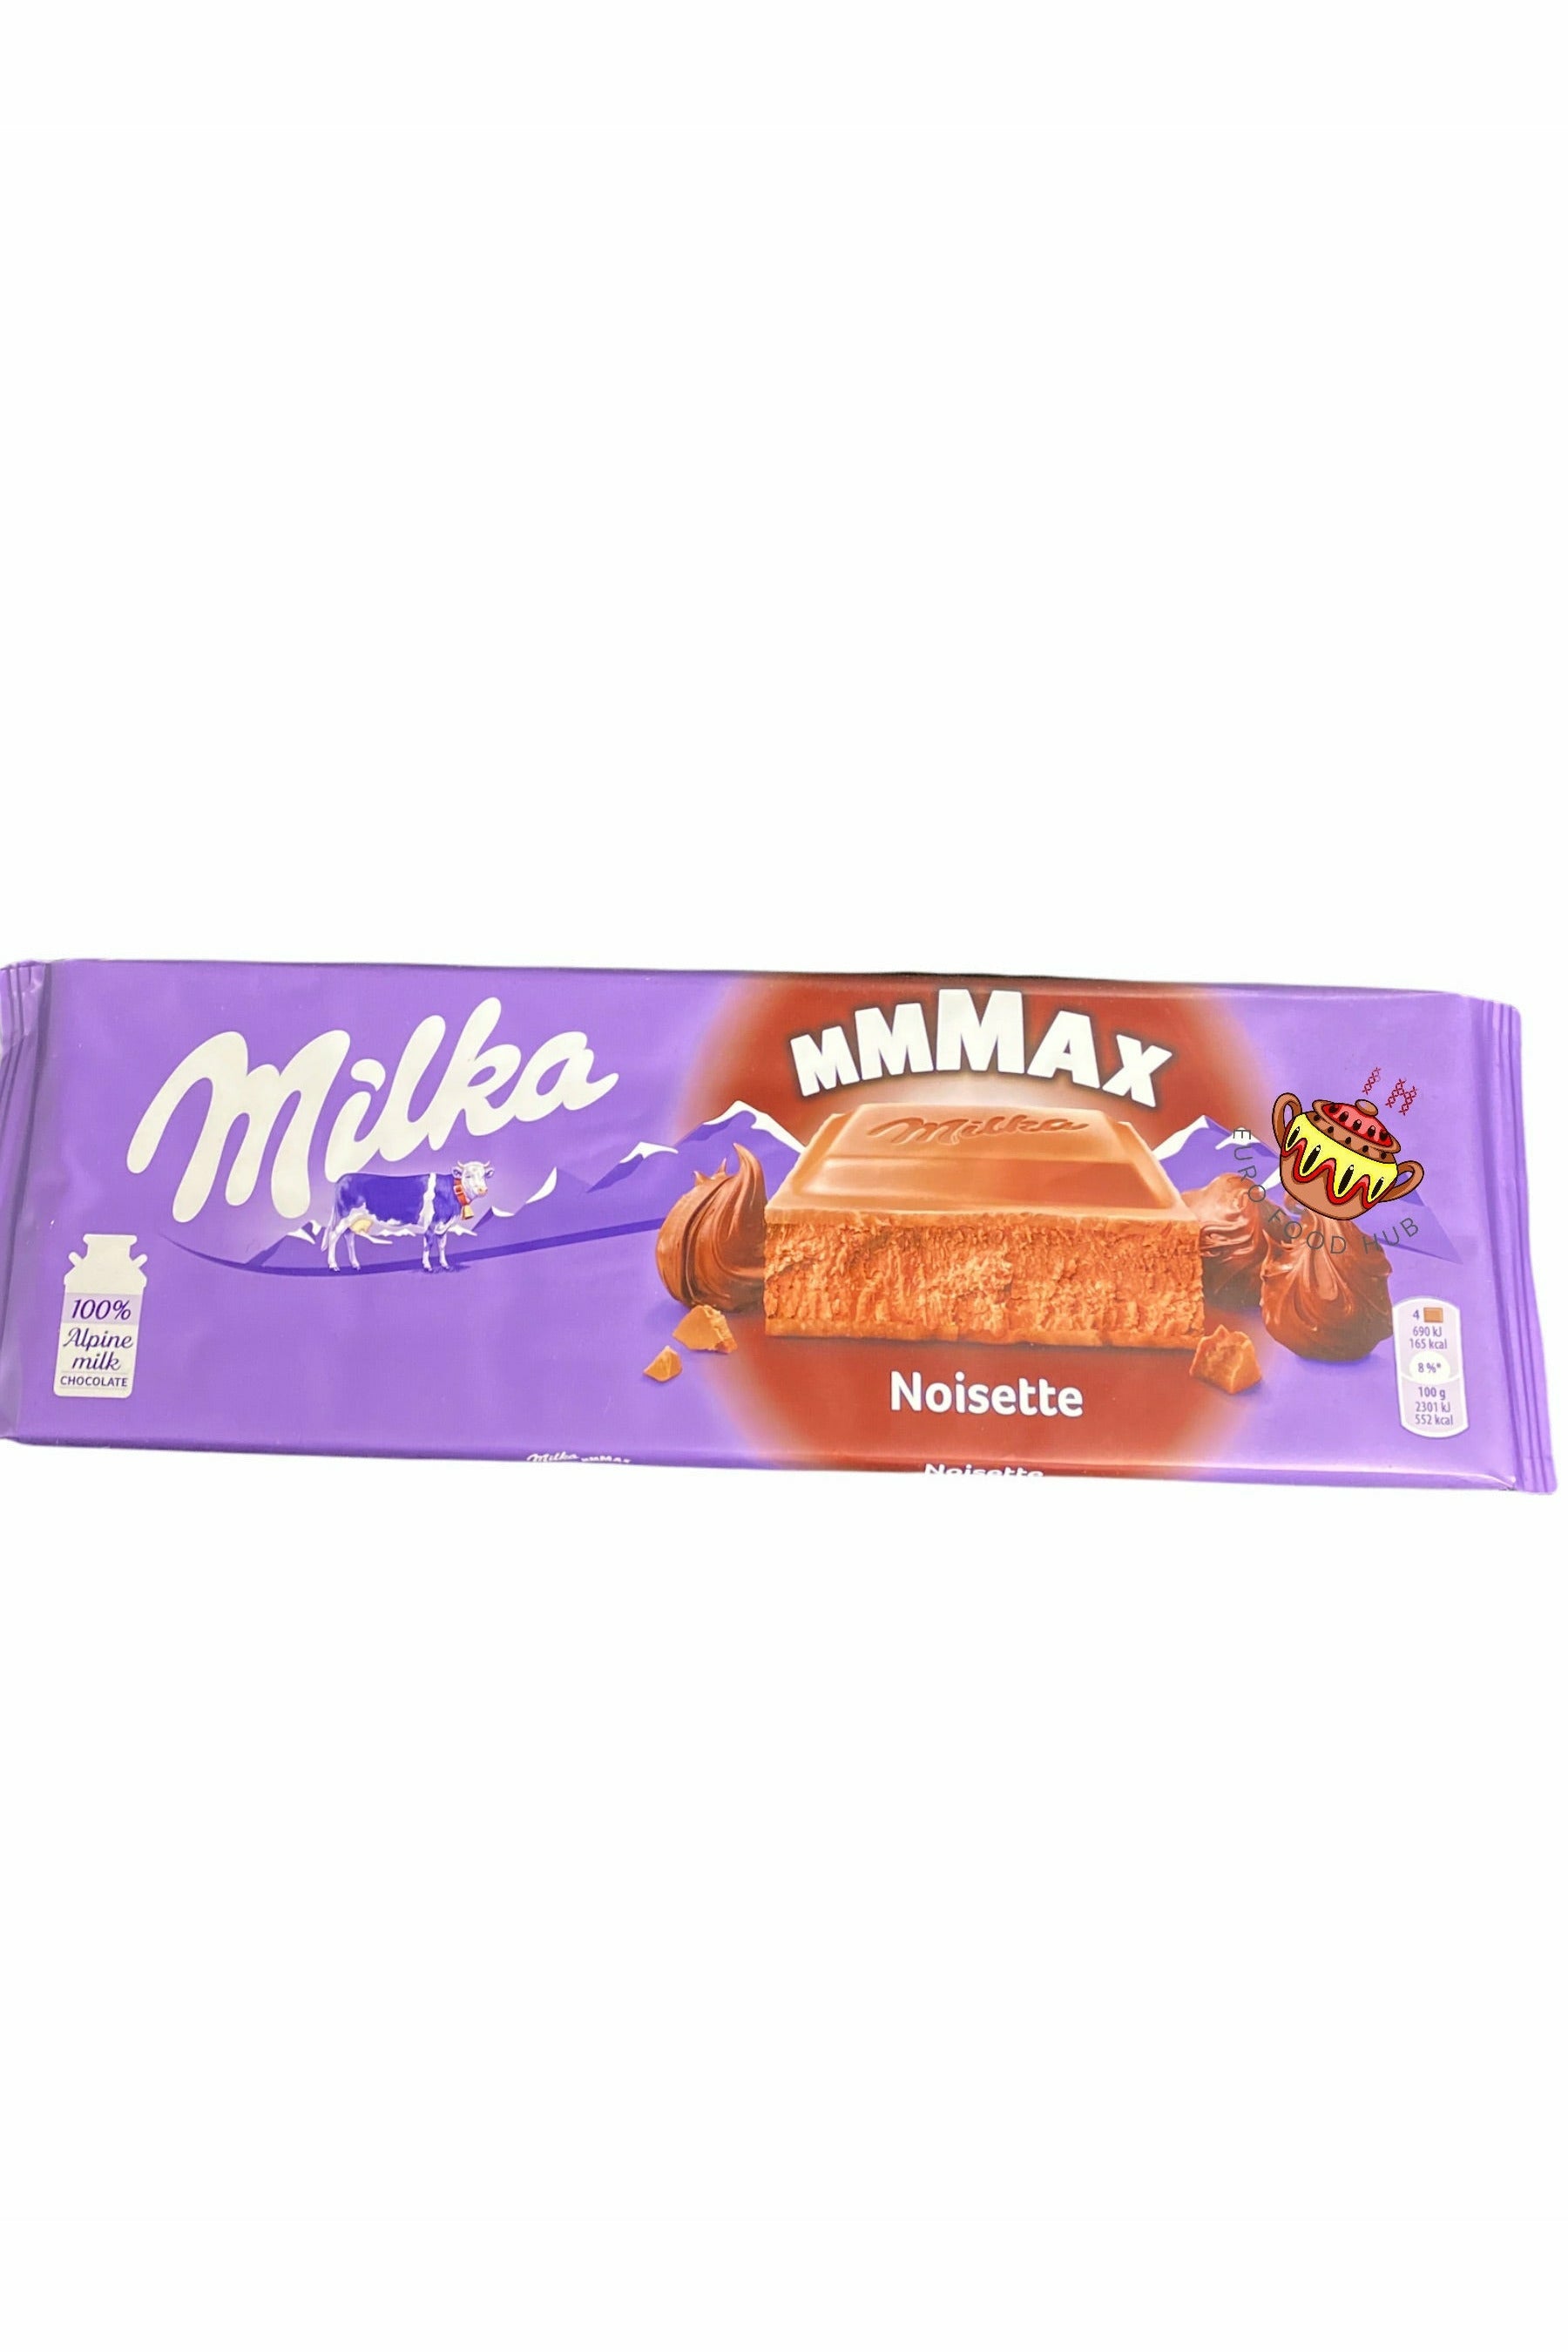 Milka Chocolate - Noisette Max - 270g - Best By 5.14.2024